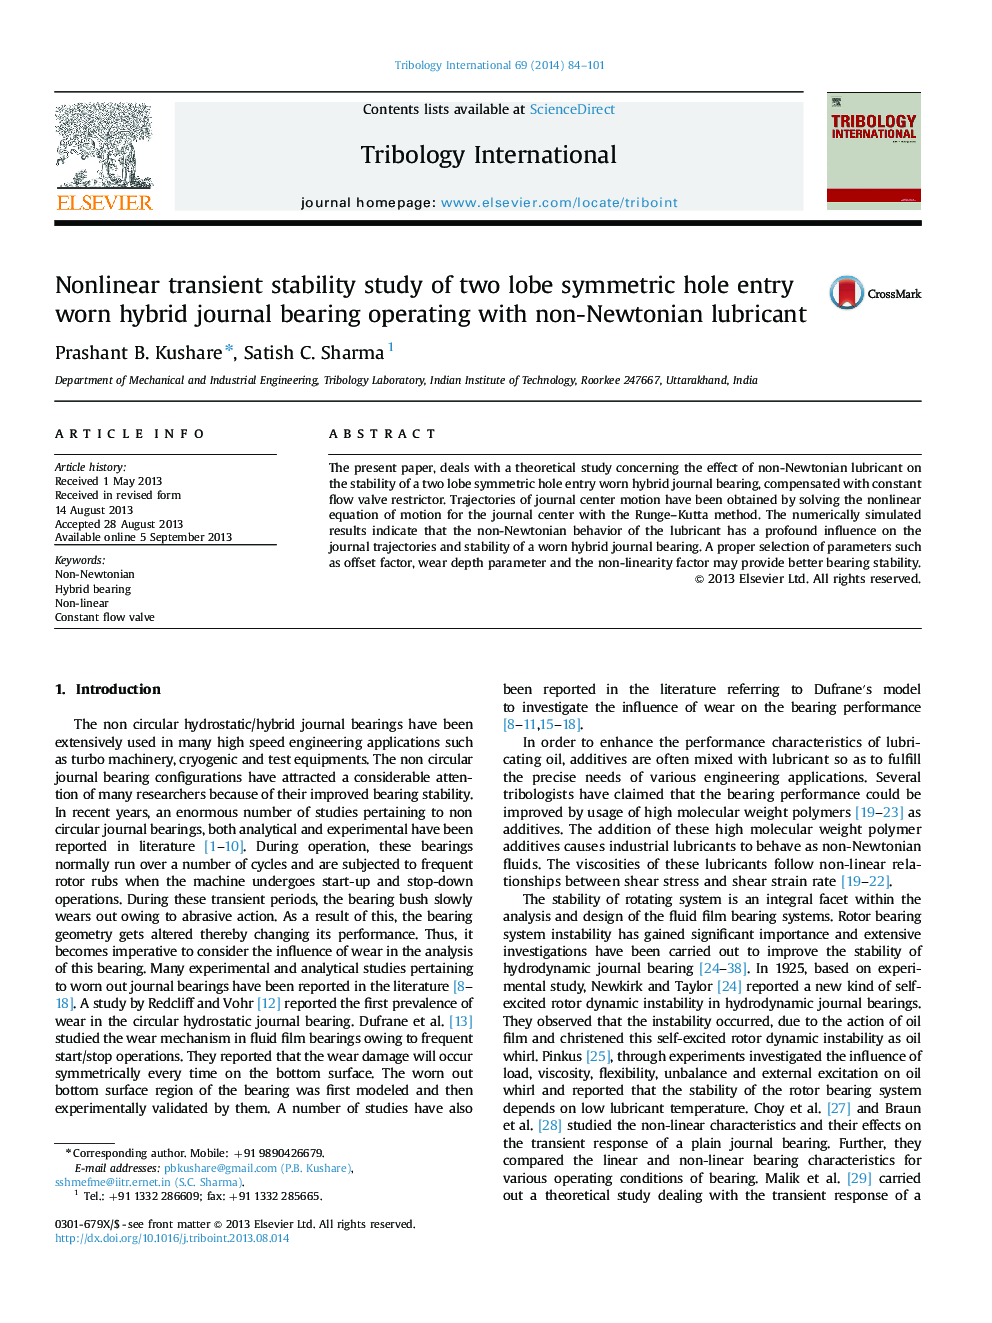 Nonlinear transient stability study of two lobe symmetric hole entry worn hybrid journal bearing operating with non-Newtonian lubricant